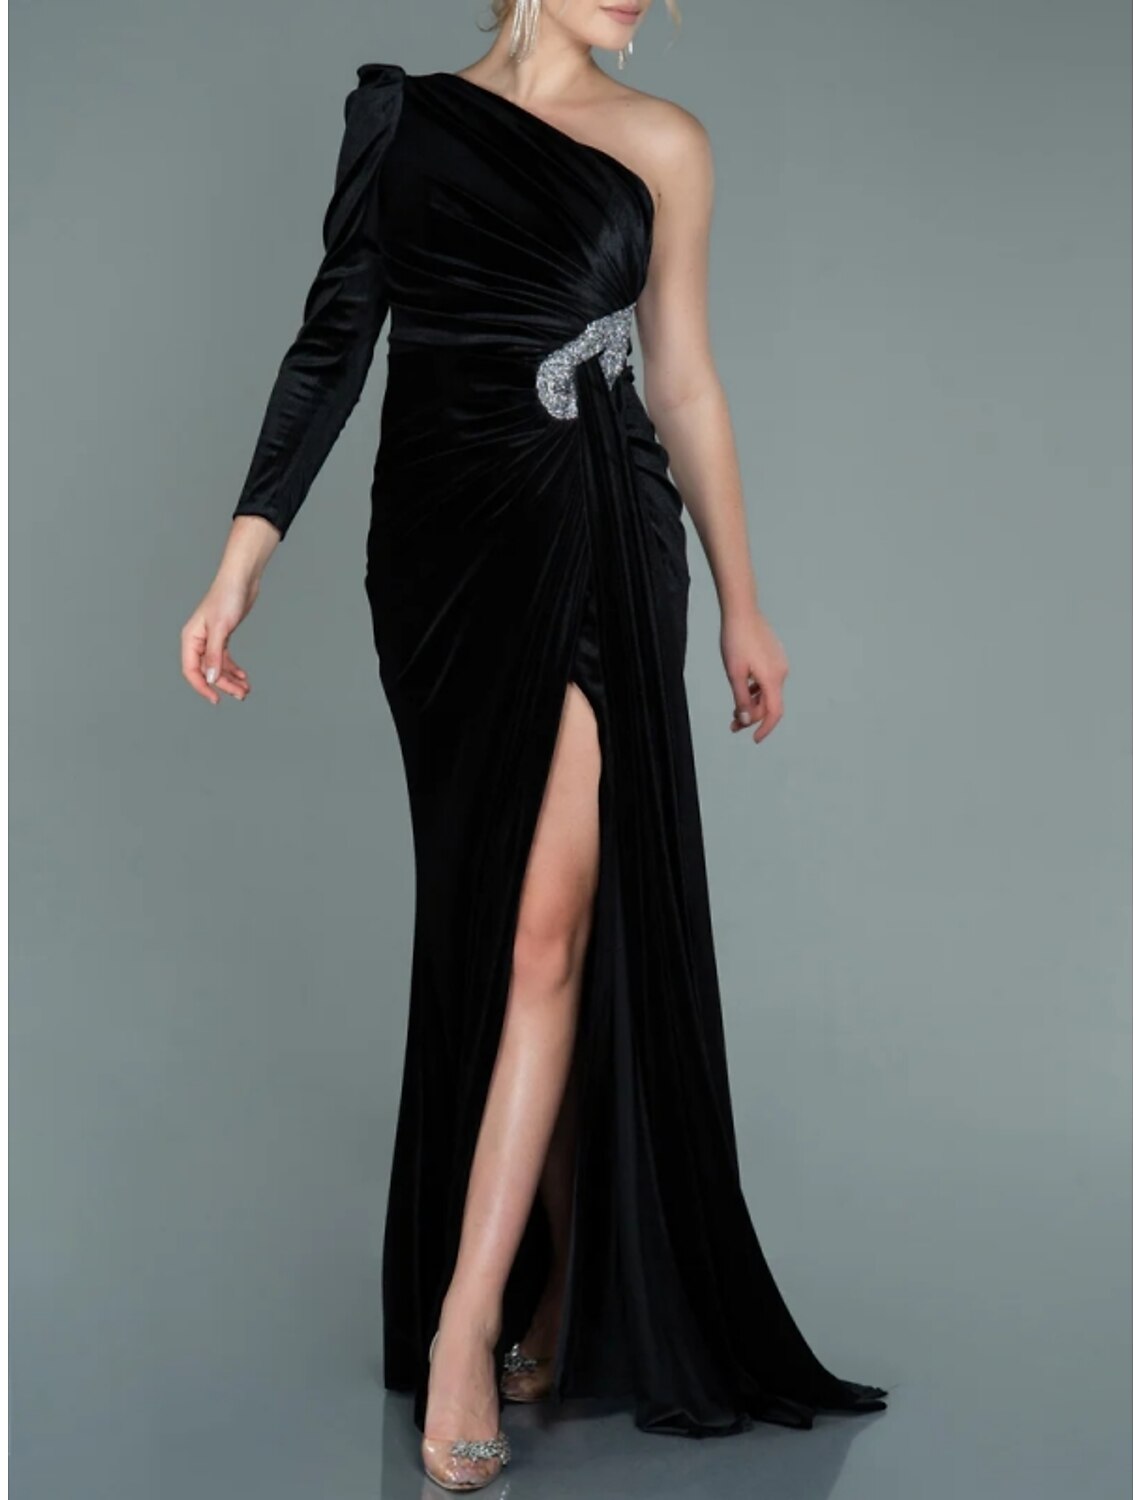 A-Line Evening Gown Christmas Elegant Dress Formal Sweep / Brush Train Long Sleeve One Shoulder Velvet with Glitter Pleats Ruched